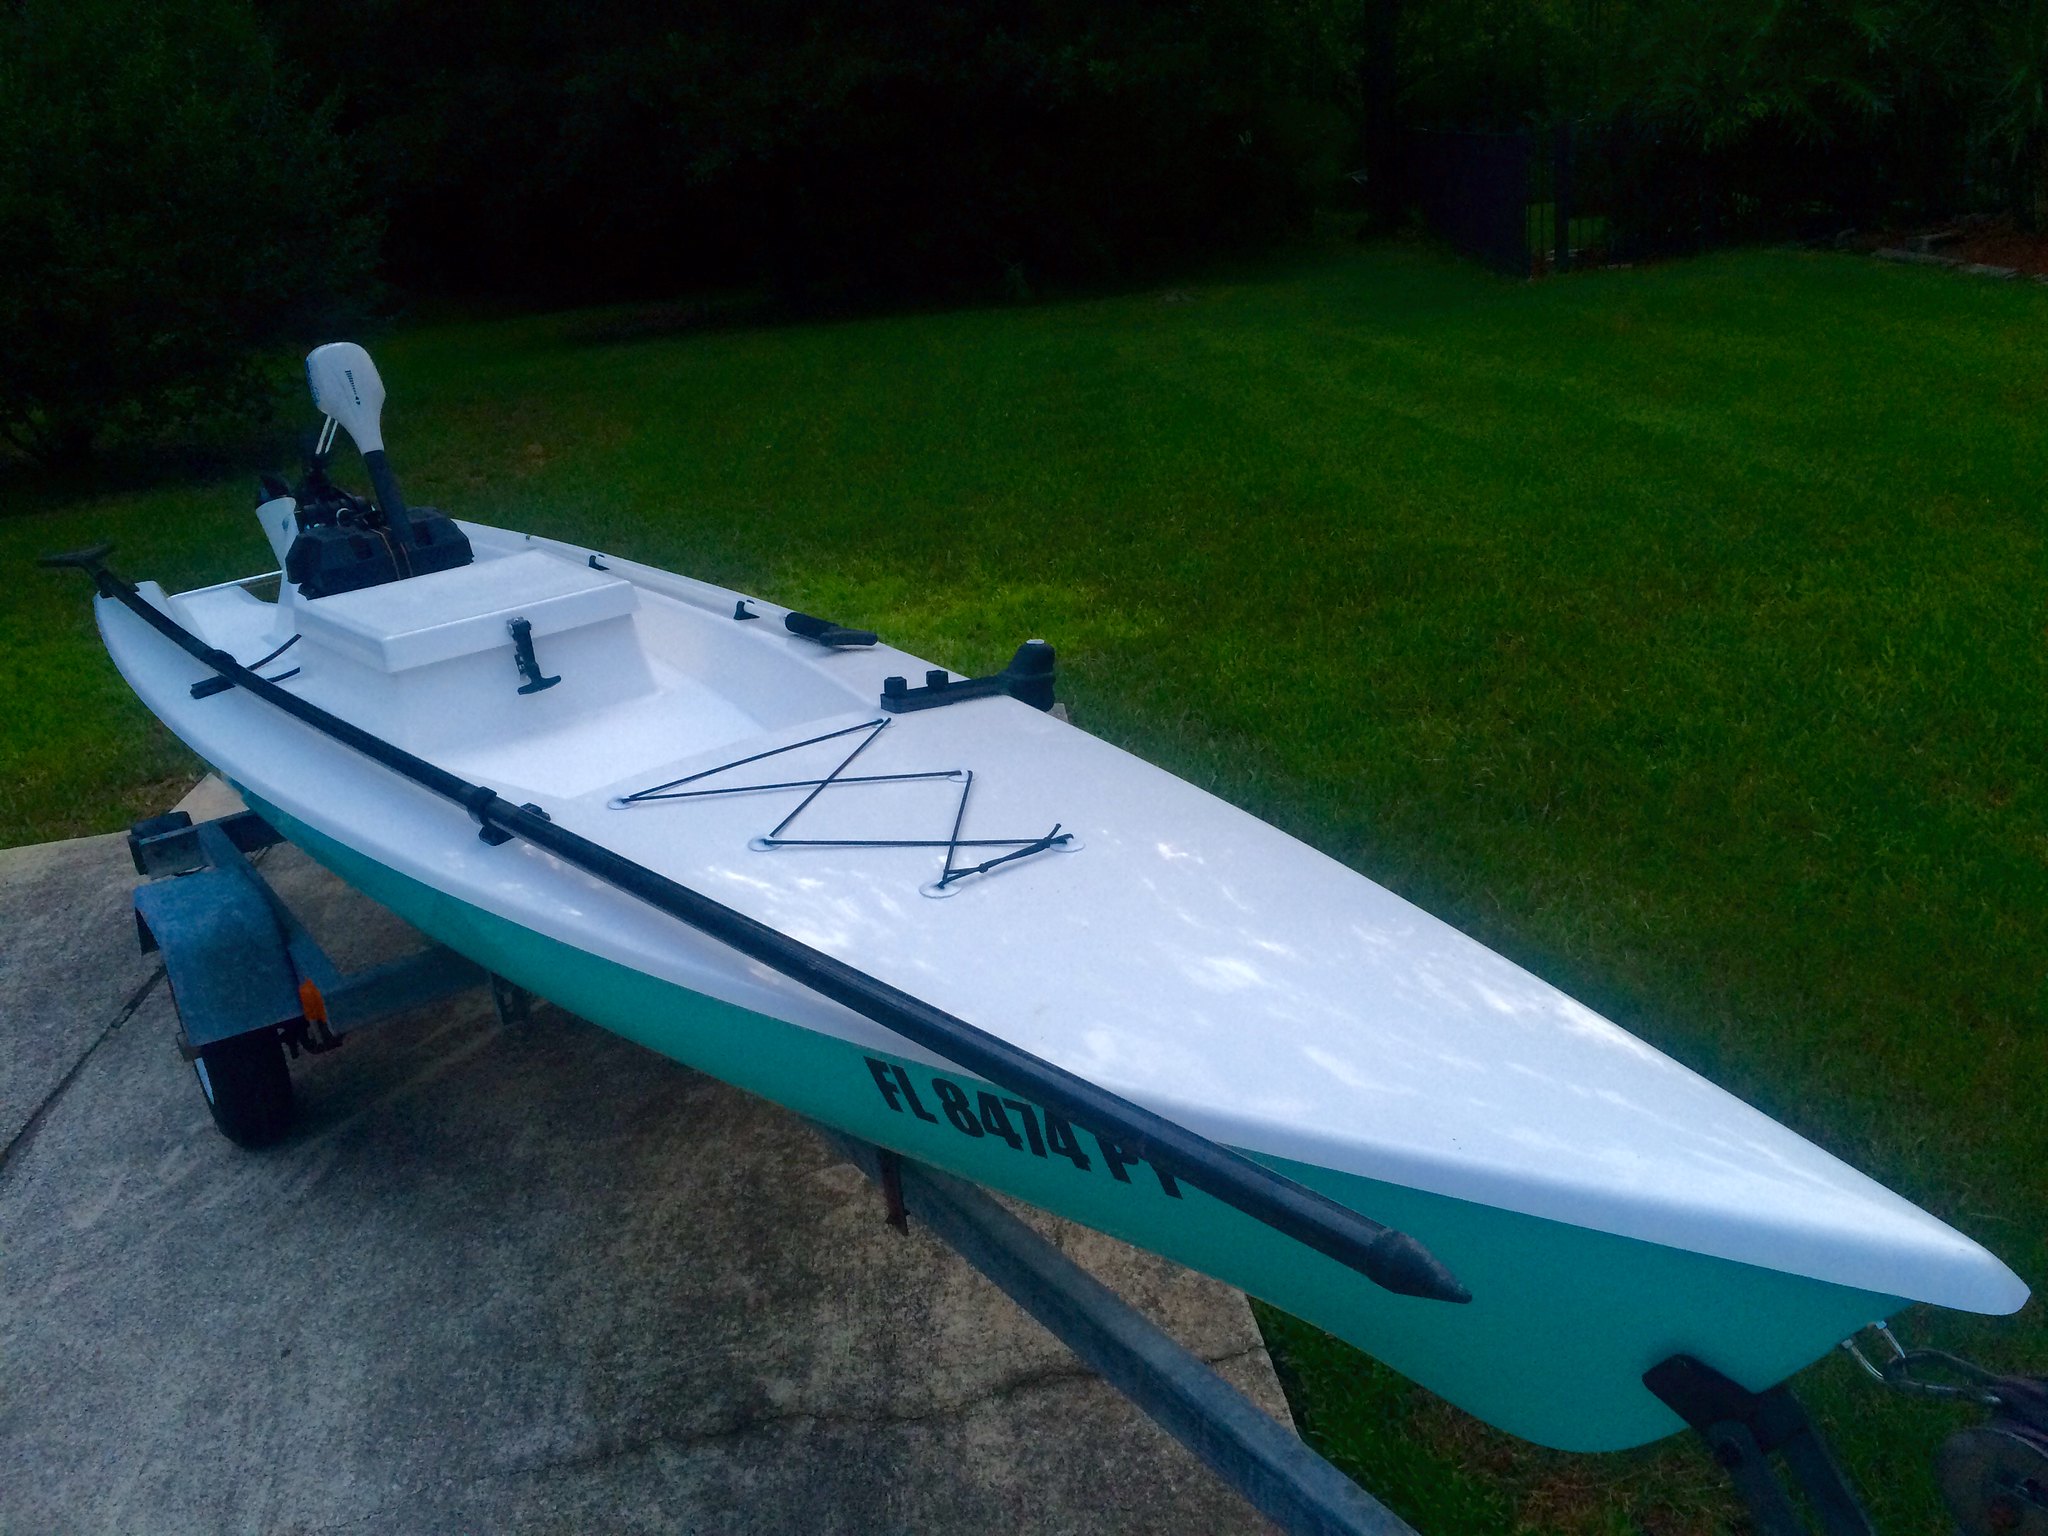 SOLD/EXPIRED - Considering Sale or Trade of Solo Skiff 